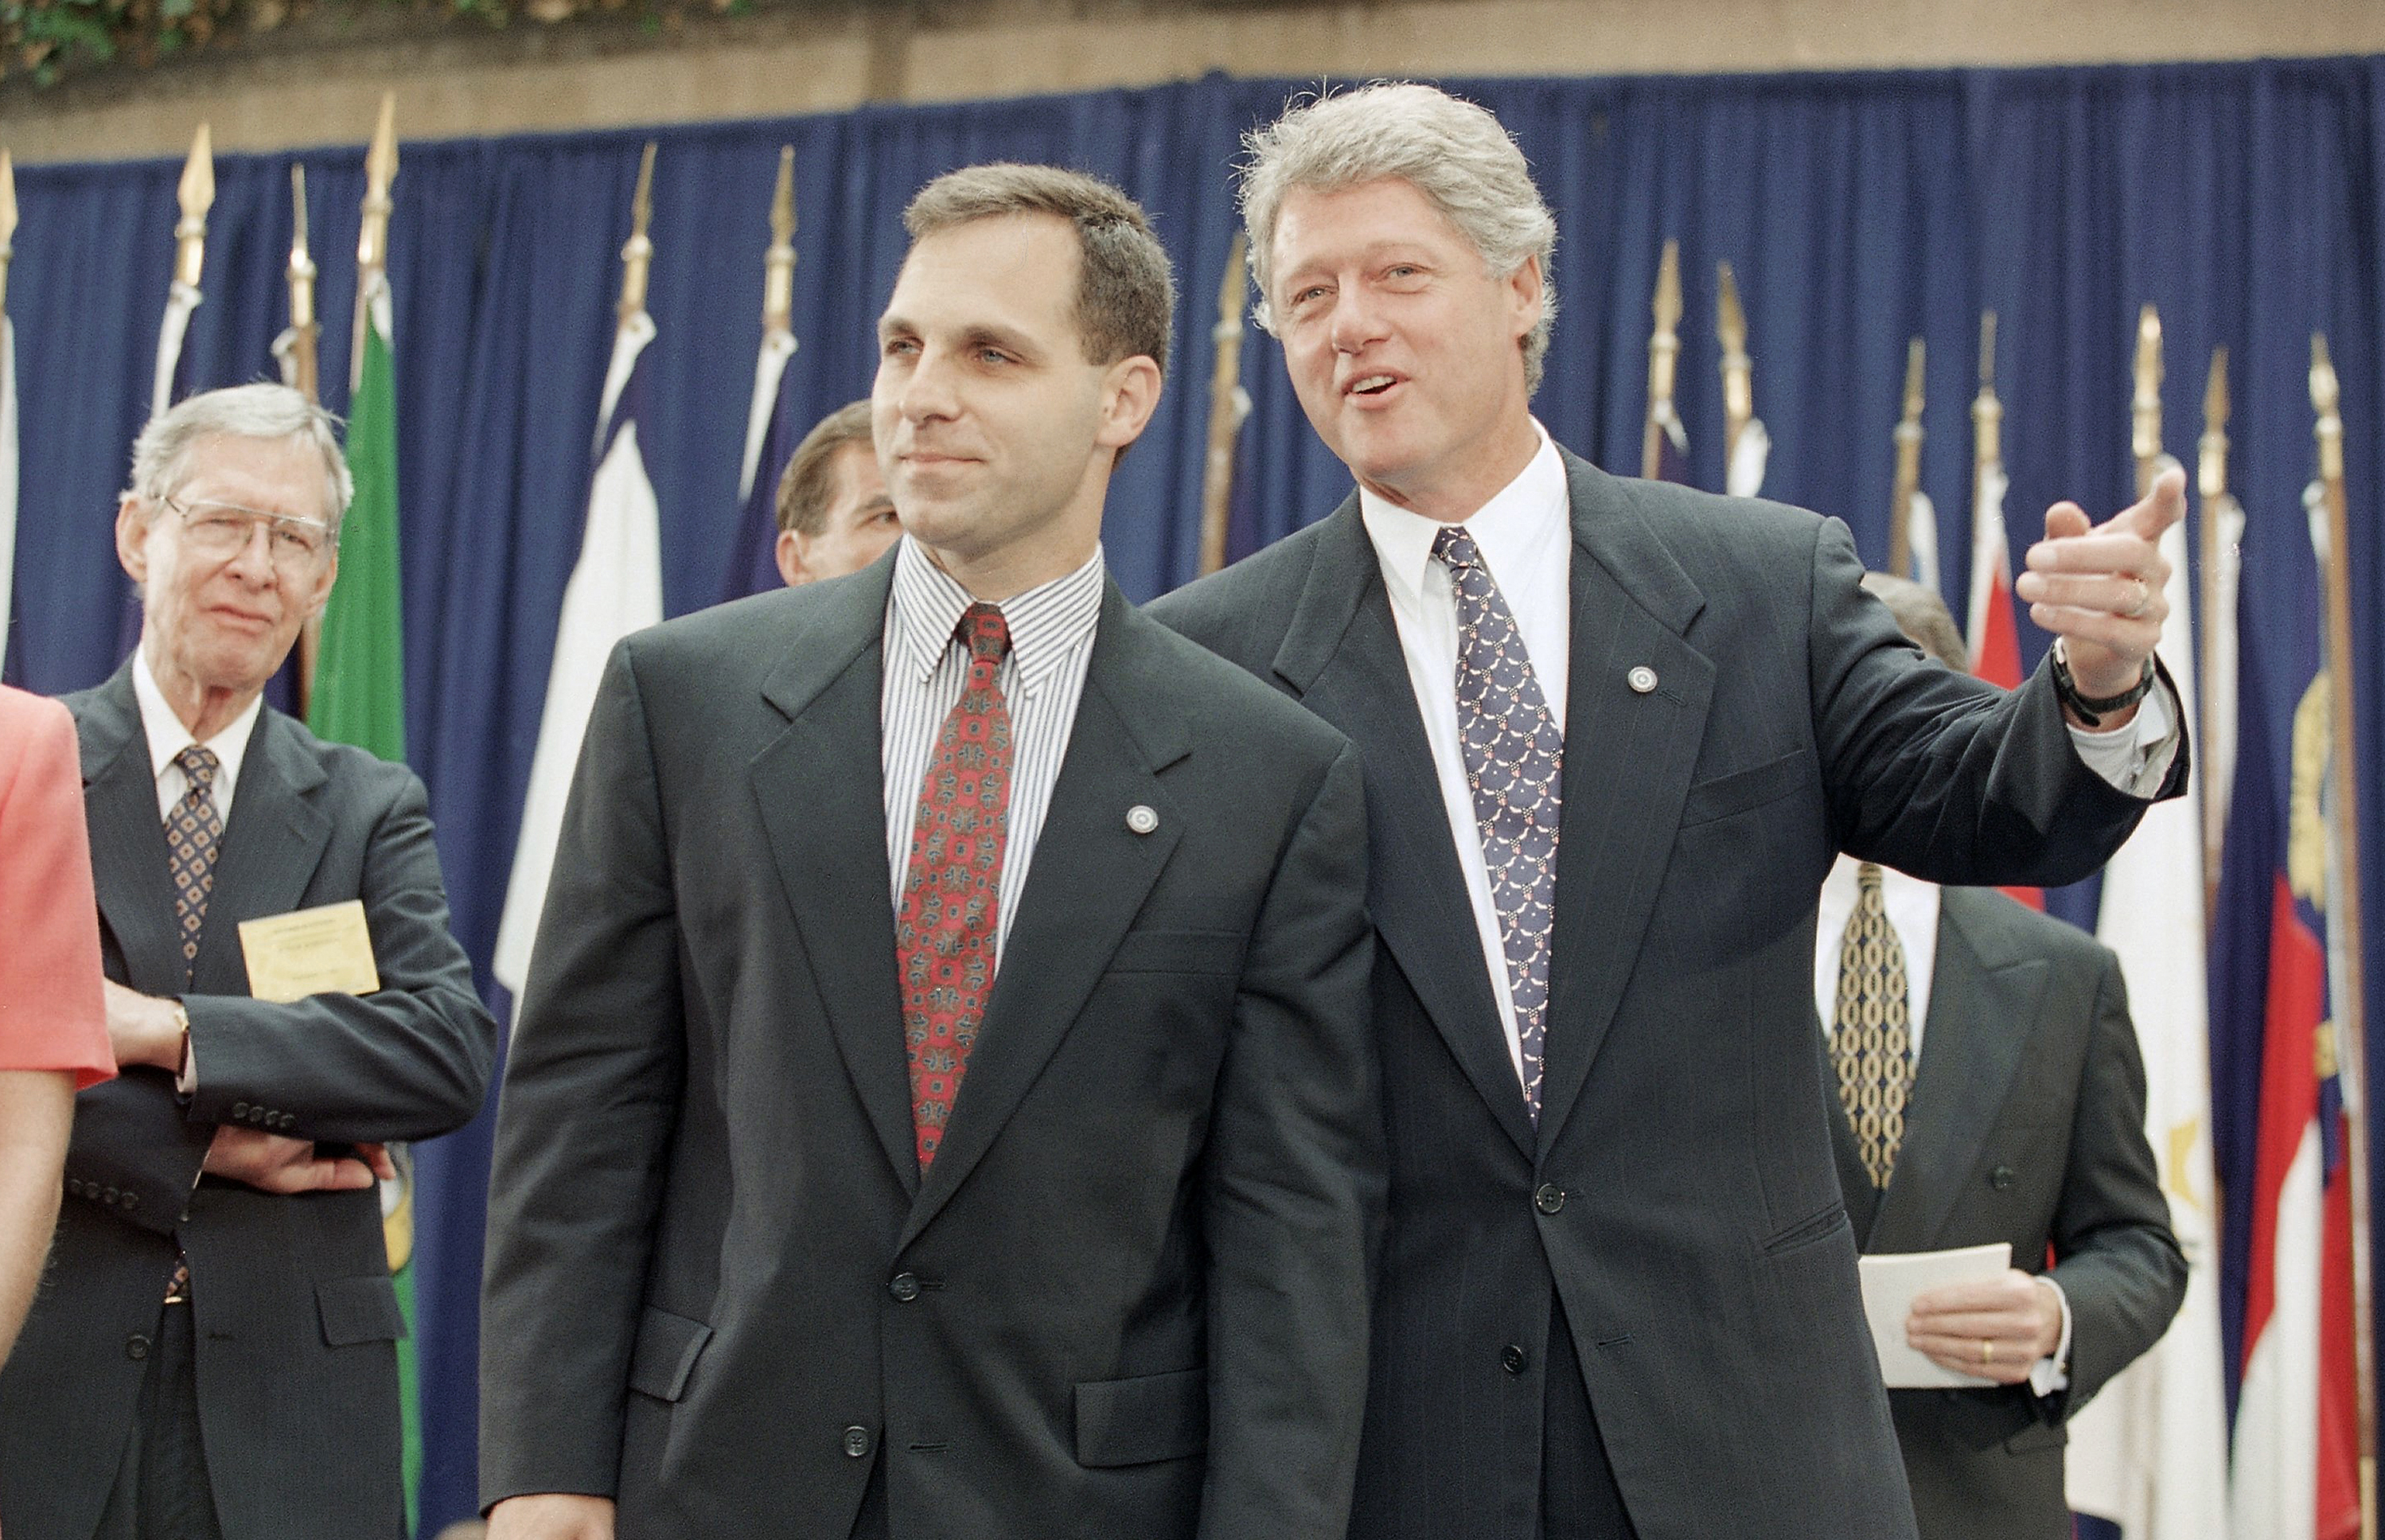 President Bill Clinton talks to FBI Director Louis Freeh during Freeh's swearing ceremony as director at FBI Headquarters in Washington on Sept. 1, 1993. (AP Photo/Wilfredo Lee)